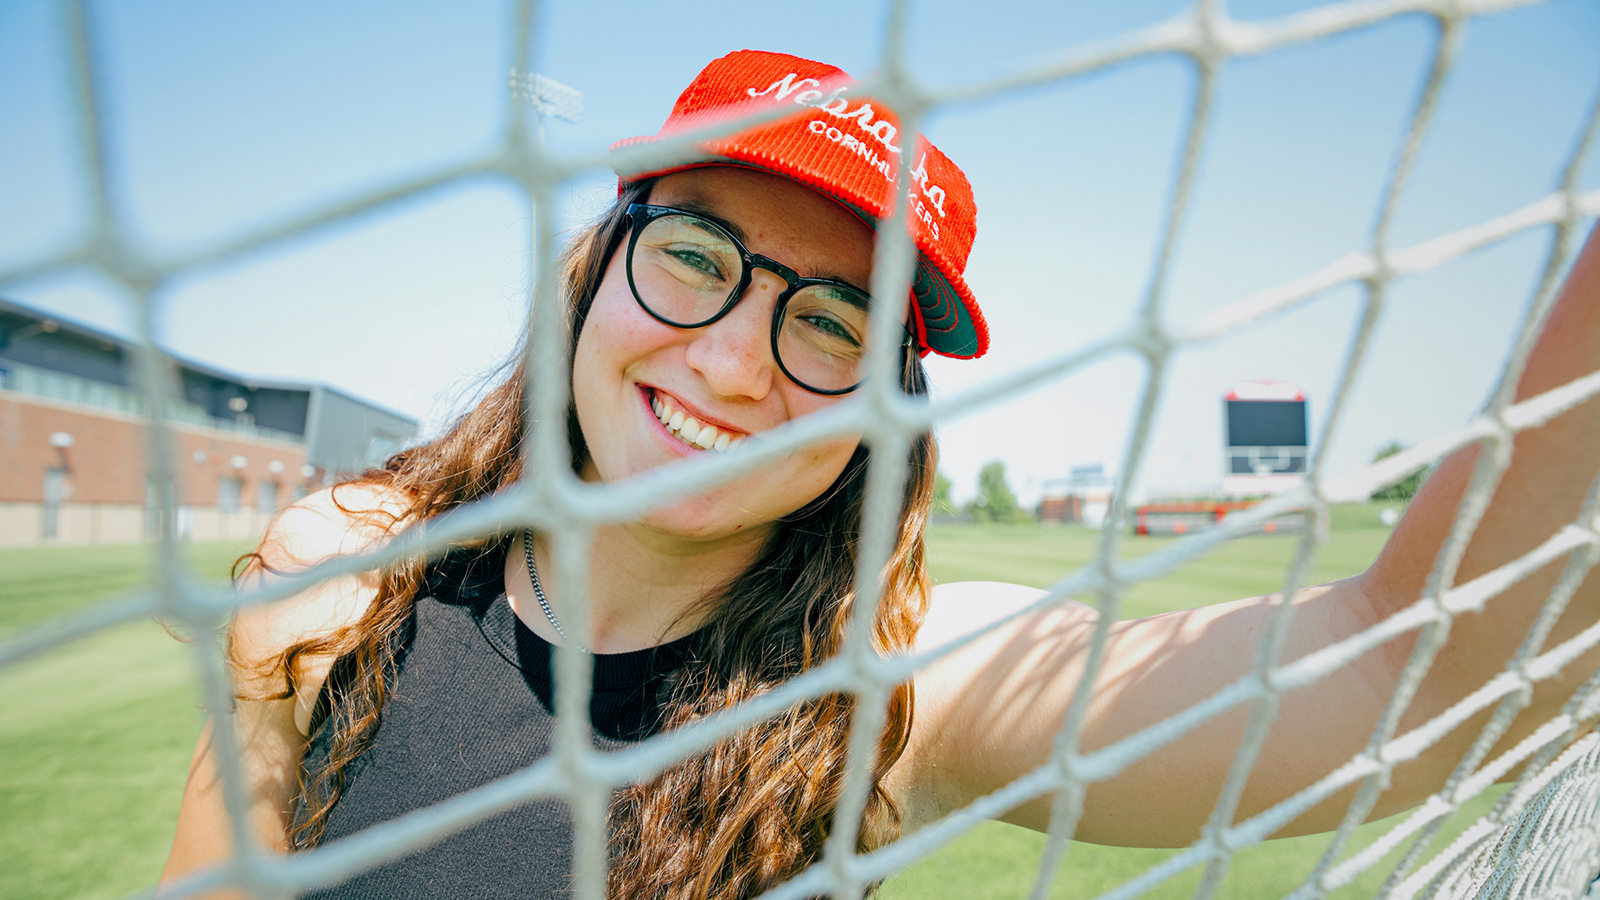 Cece Villa smiles through a soccer net while wearing a red Nebraska cap and black tank top; photo by Kristen Labadie | University Communication and Marketing